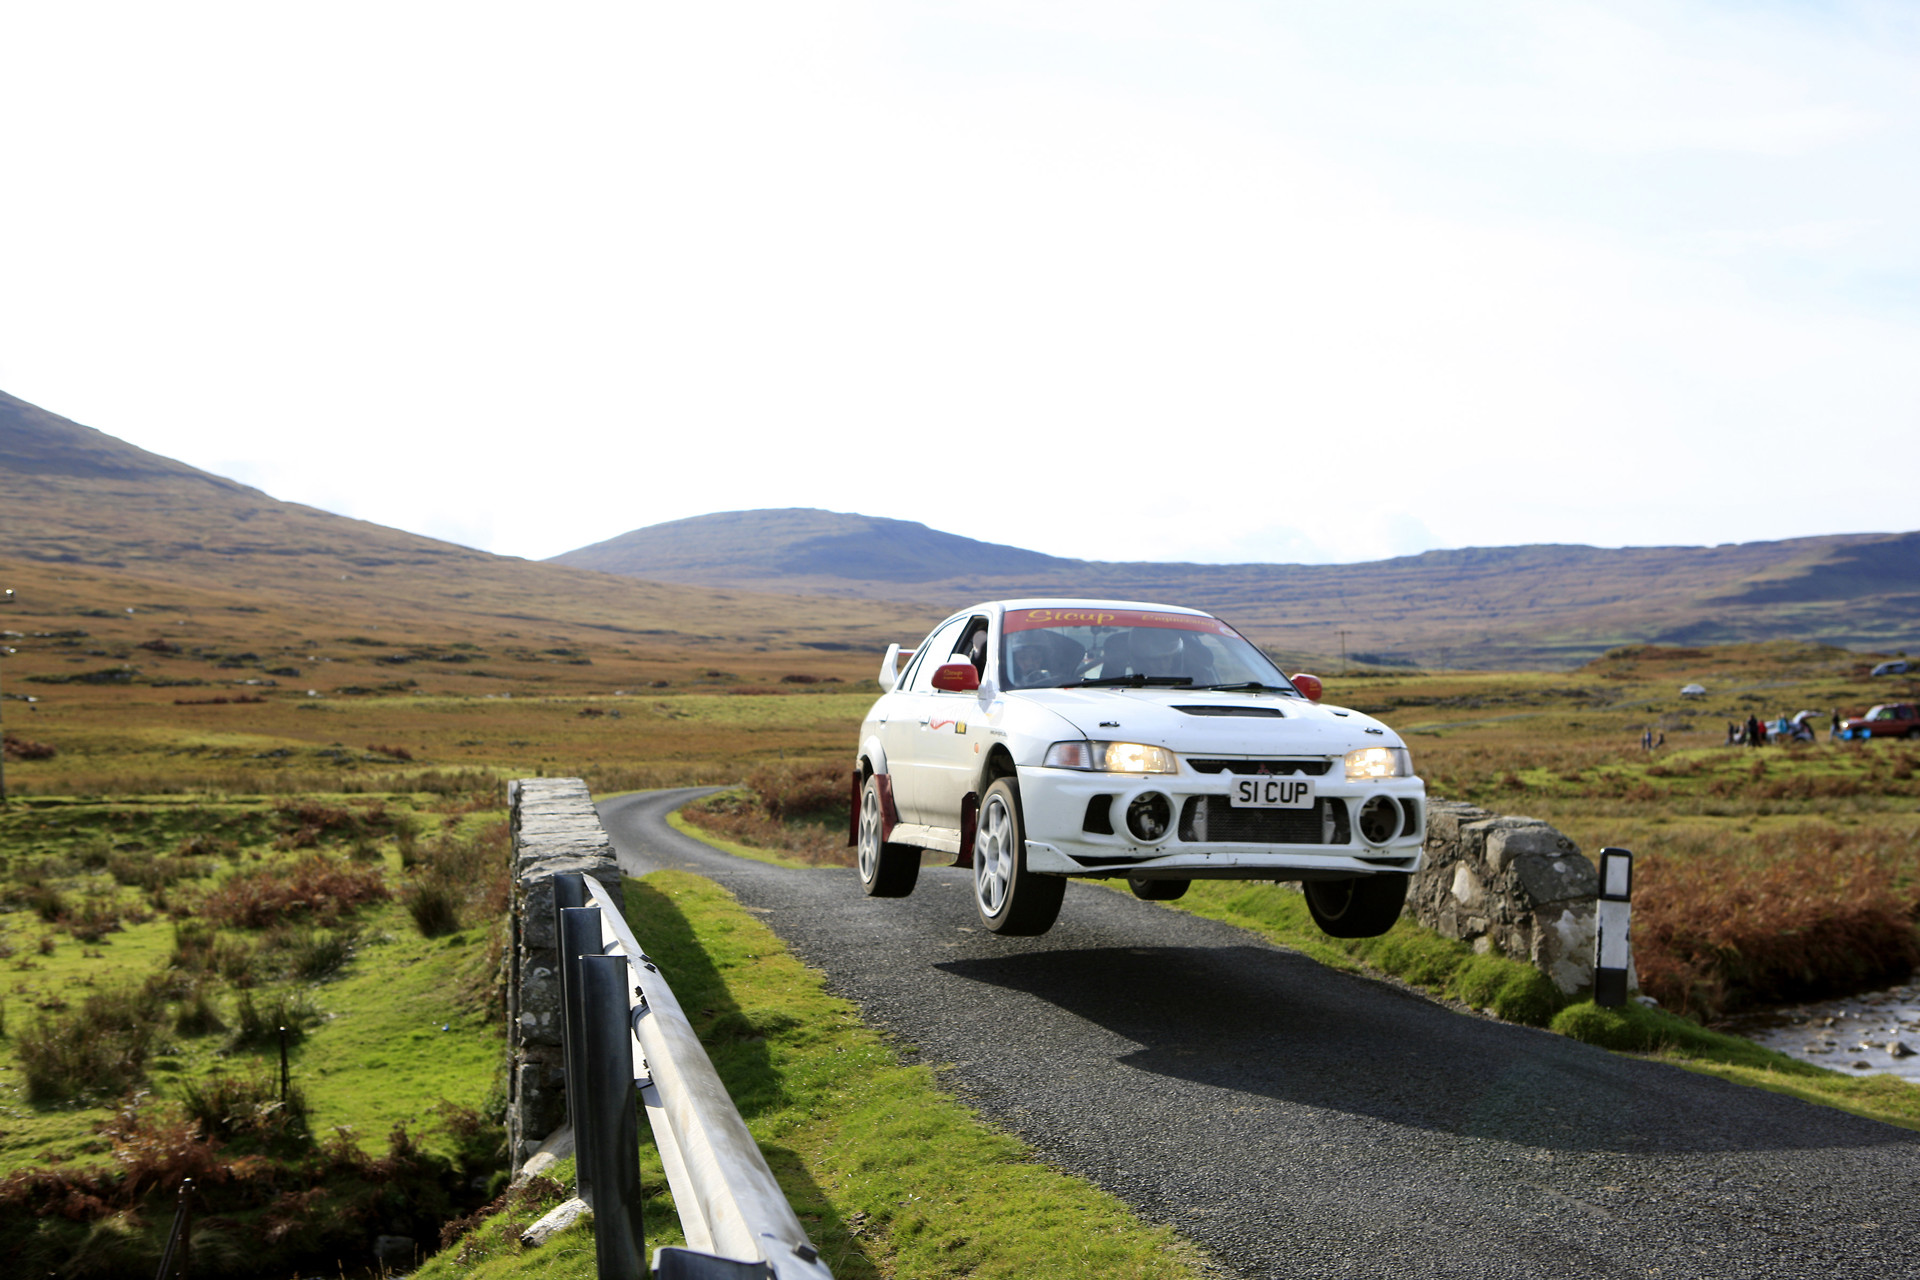 Background image - Mull Rally